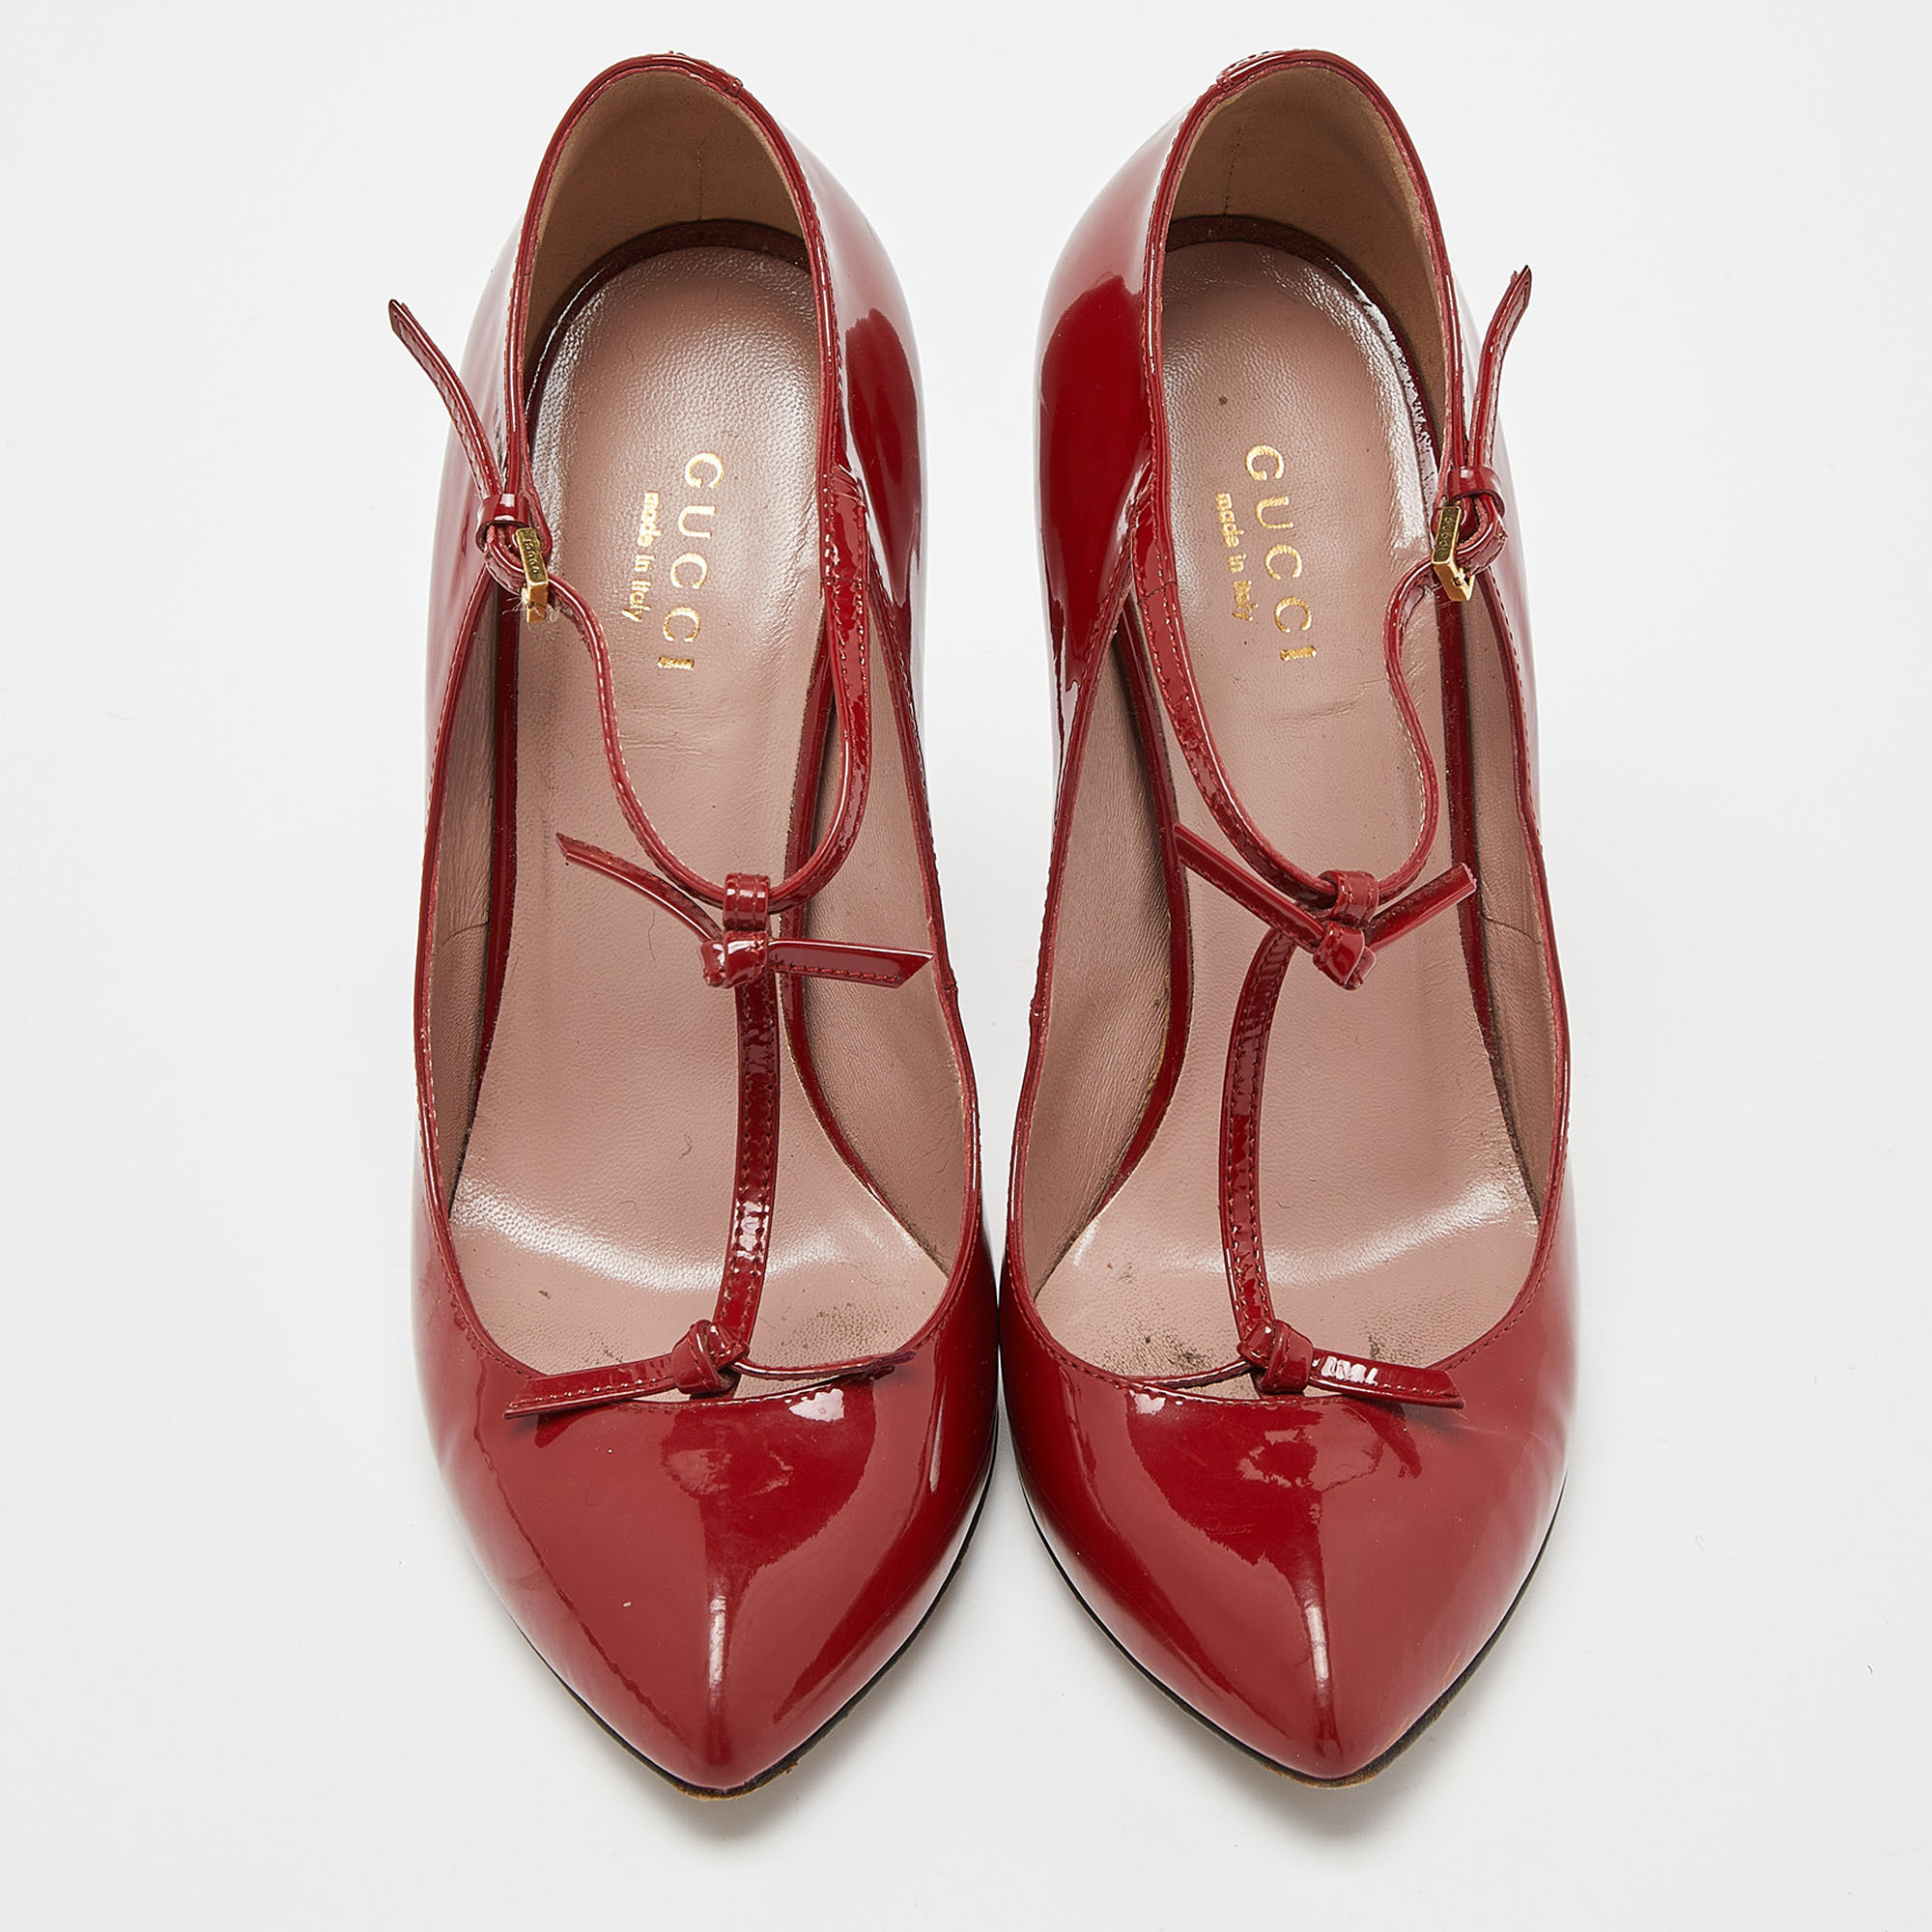 Gucci Red Patent Leather Knotted Bow T-Strap Pumps Size 36